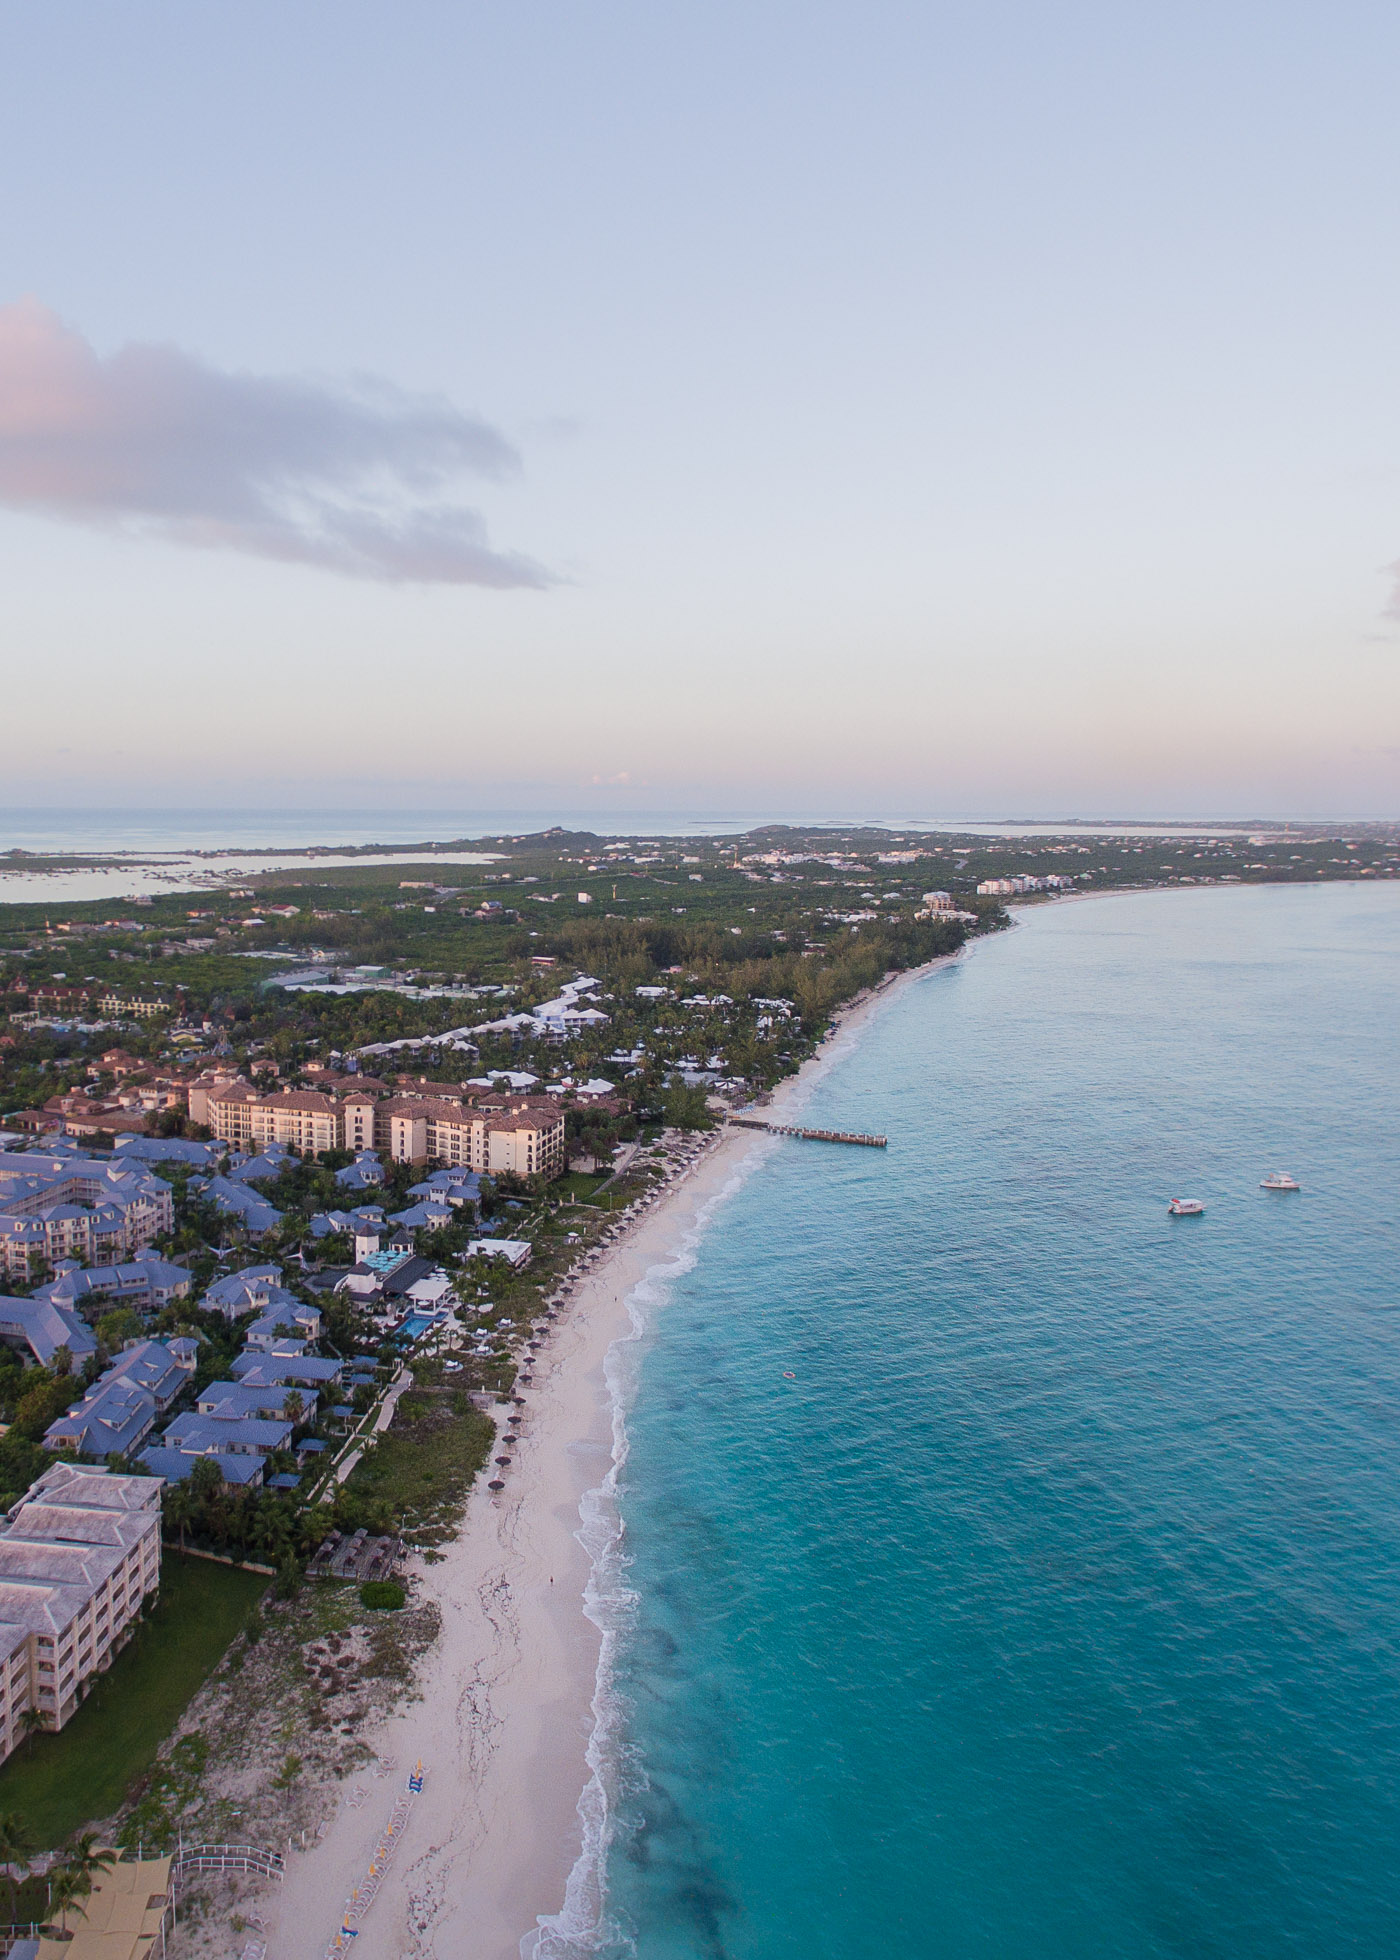 Sunrise over Beaches Resort in Turks and Caicos, as seen from a drone.